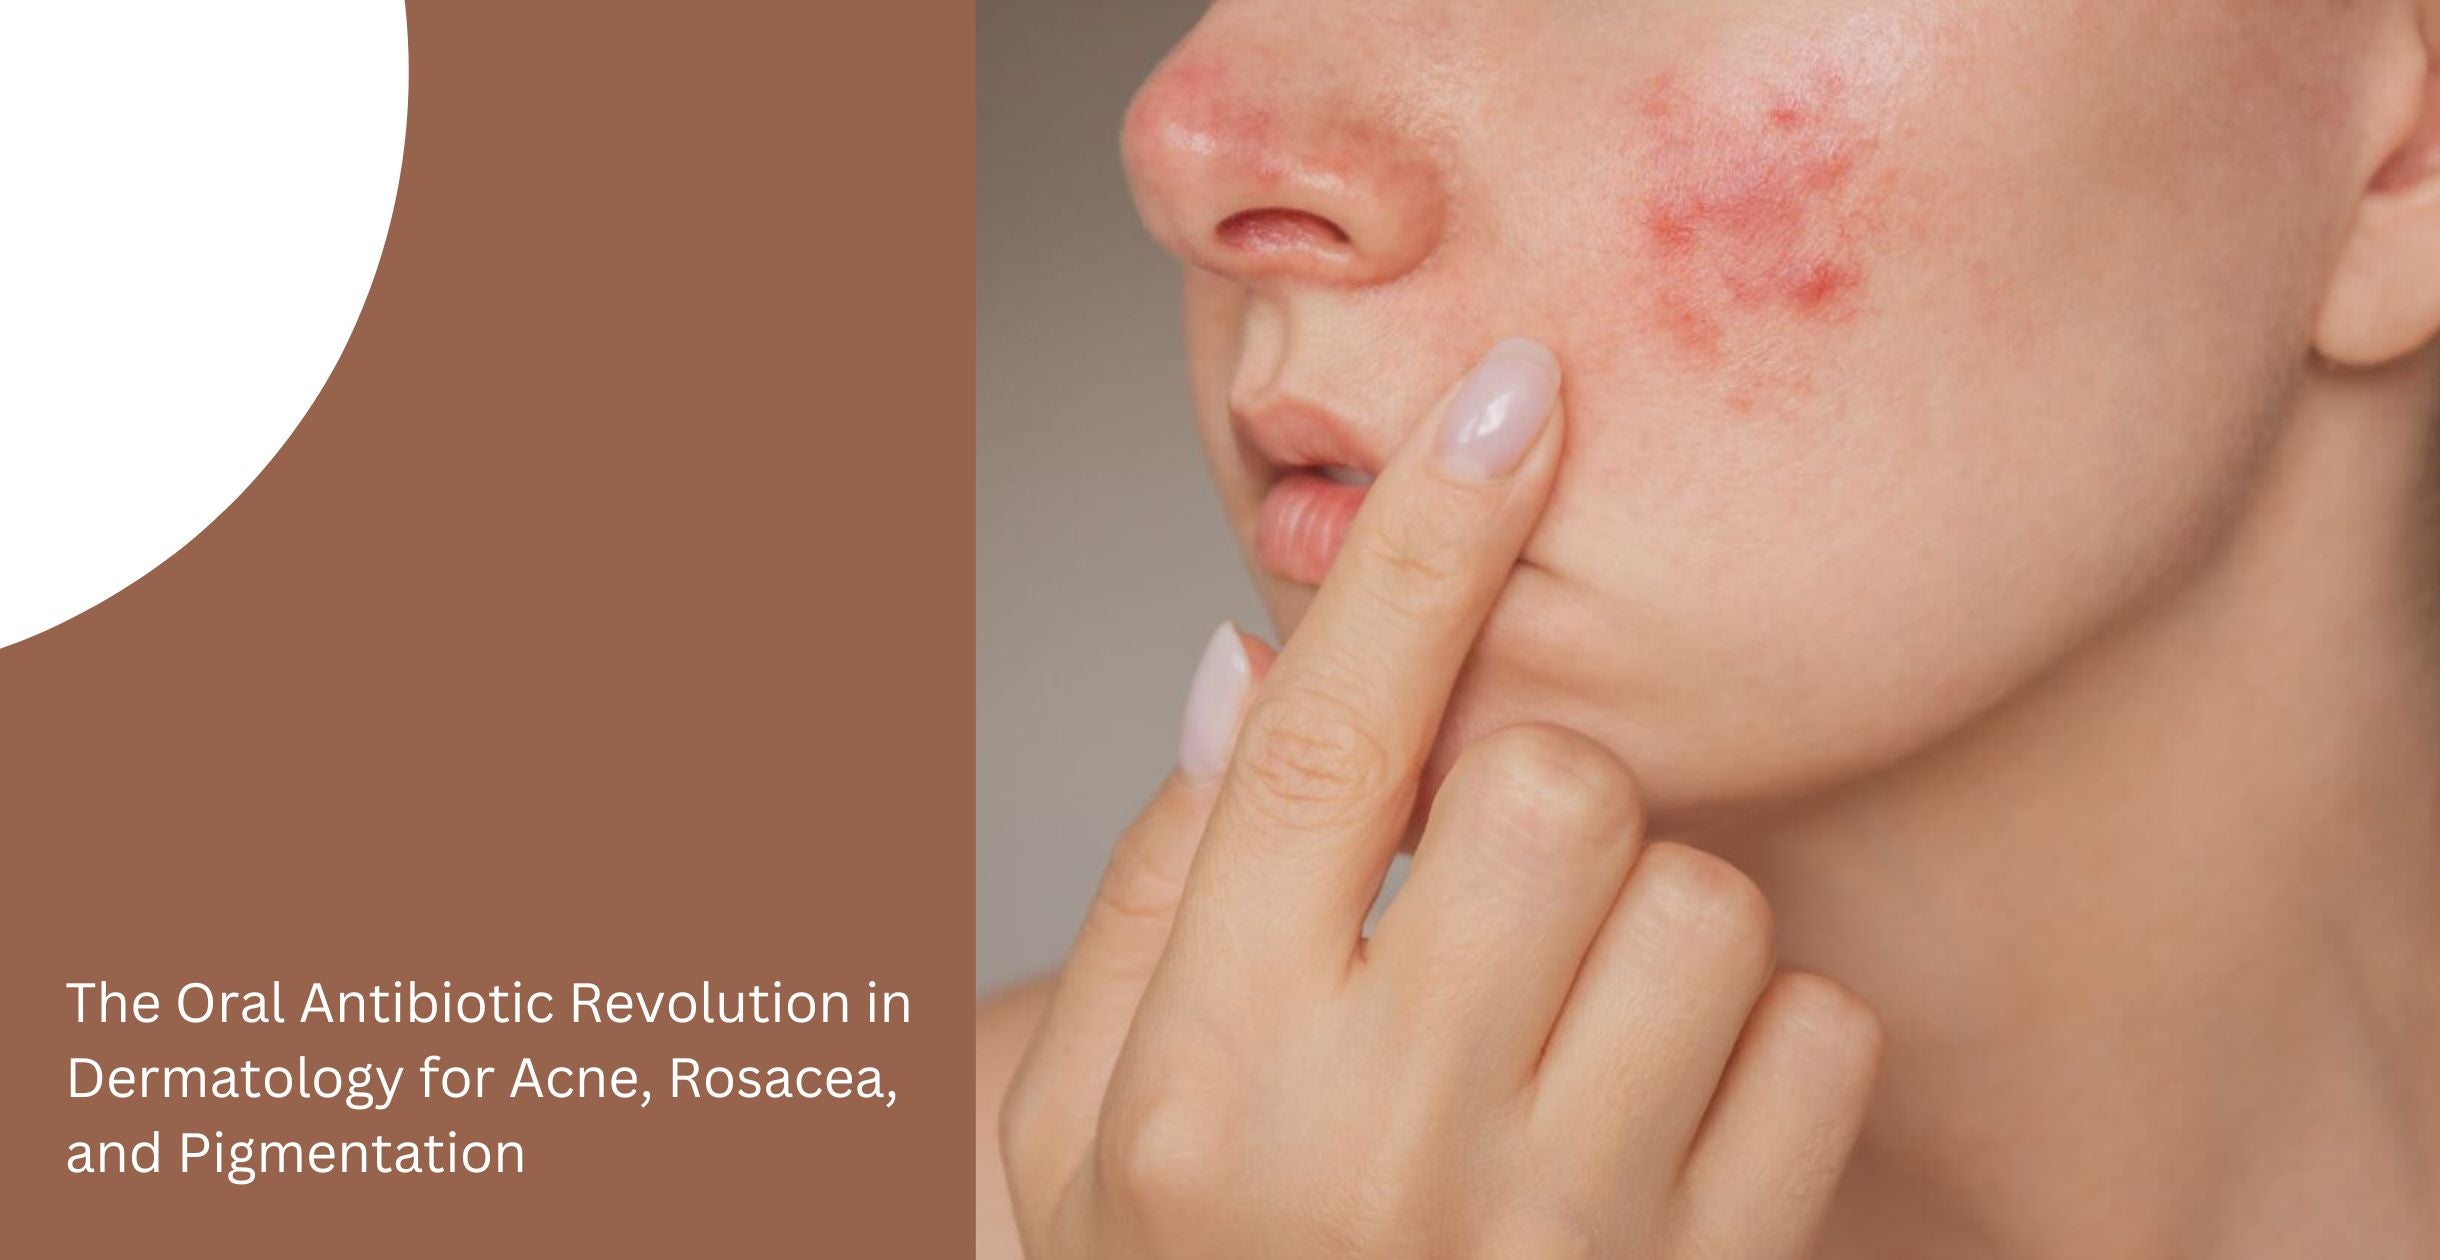 Oral Antibiotics in Dermatology for Acne, Rosacea, and Pigmentation